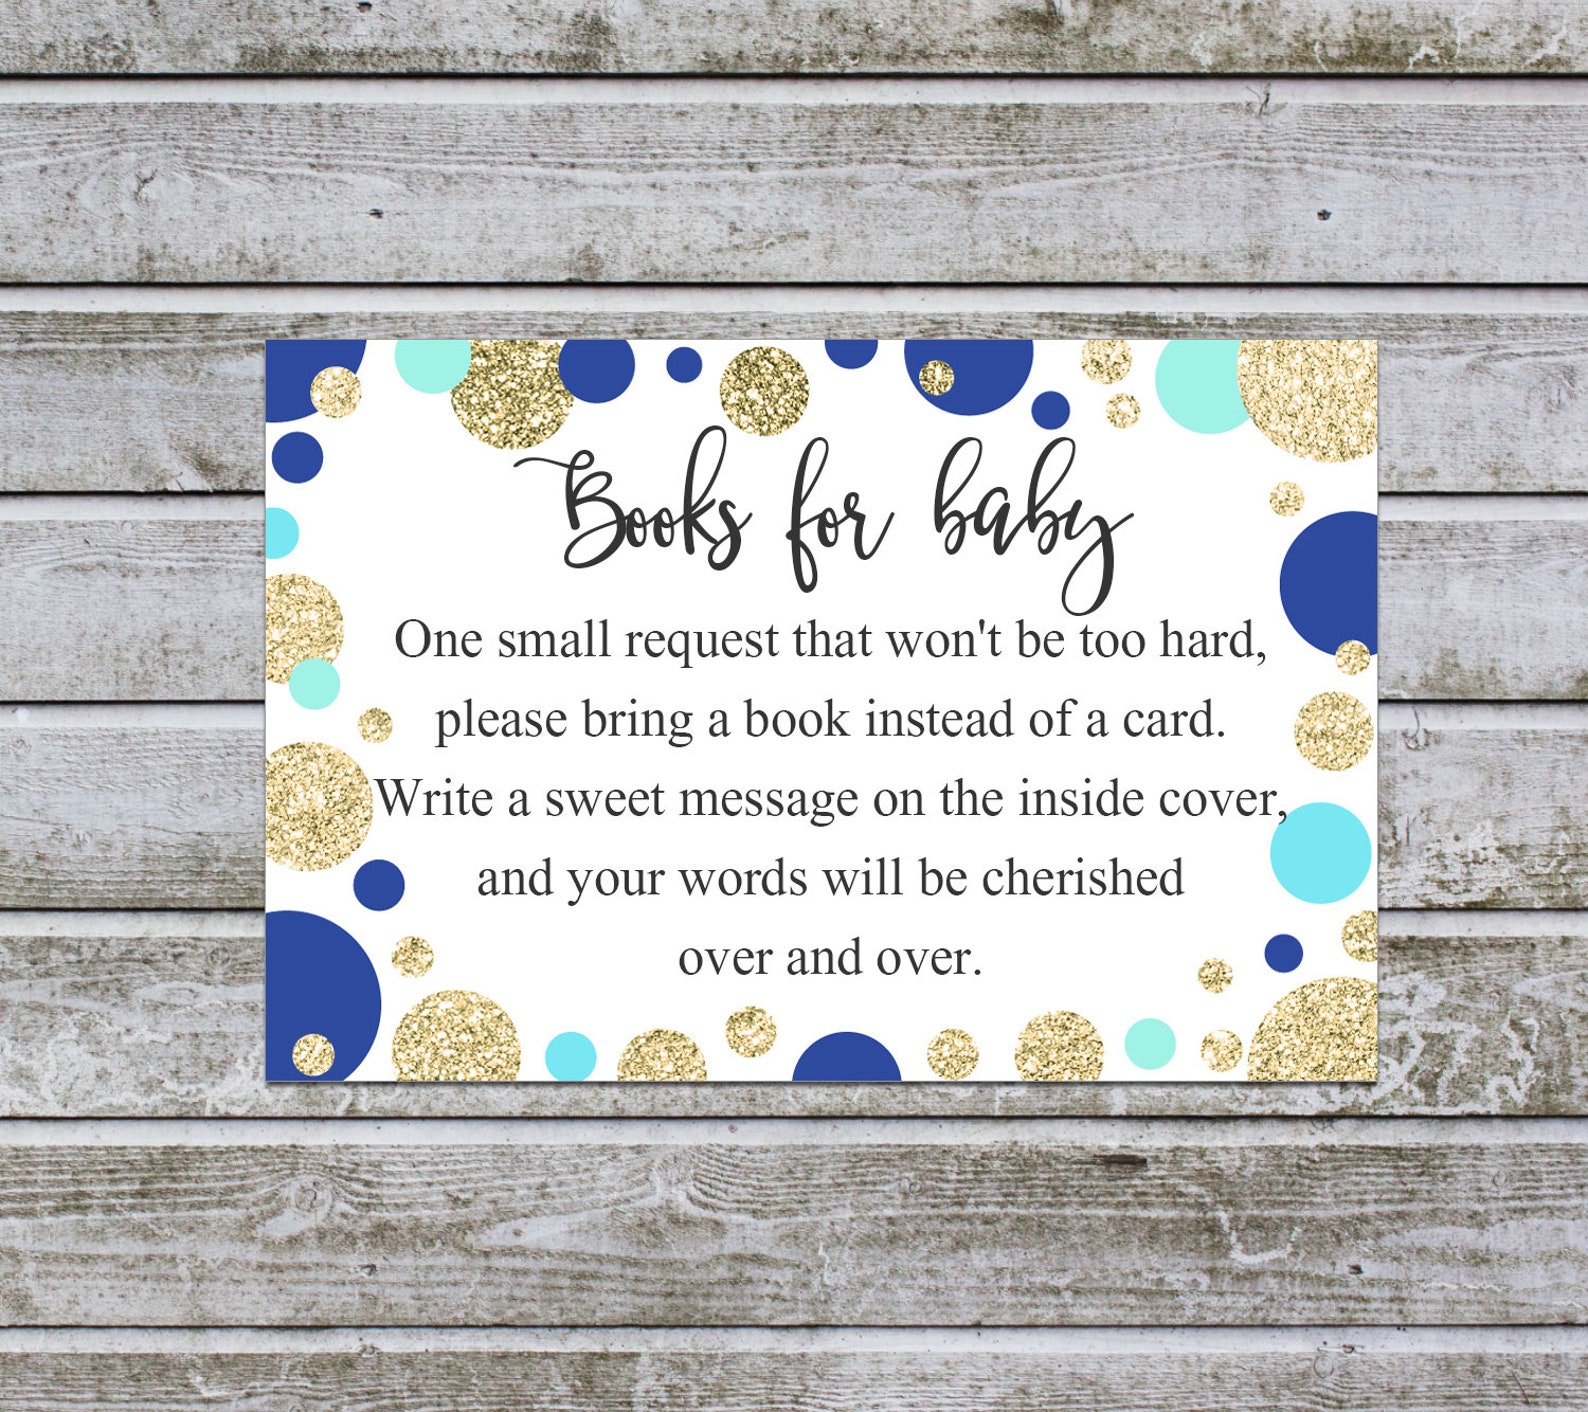 bring-a-book-instead-of-a-card-book-request-baby-printable-boy-etsy